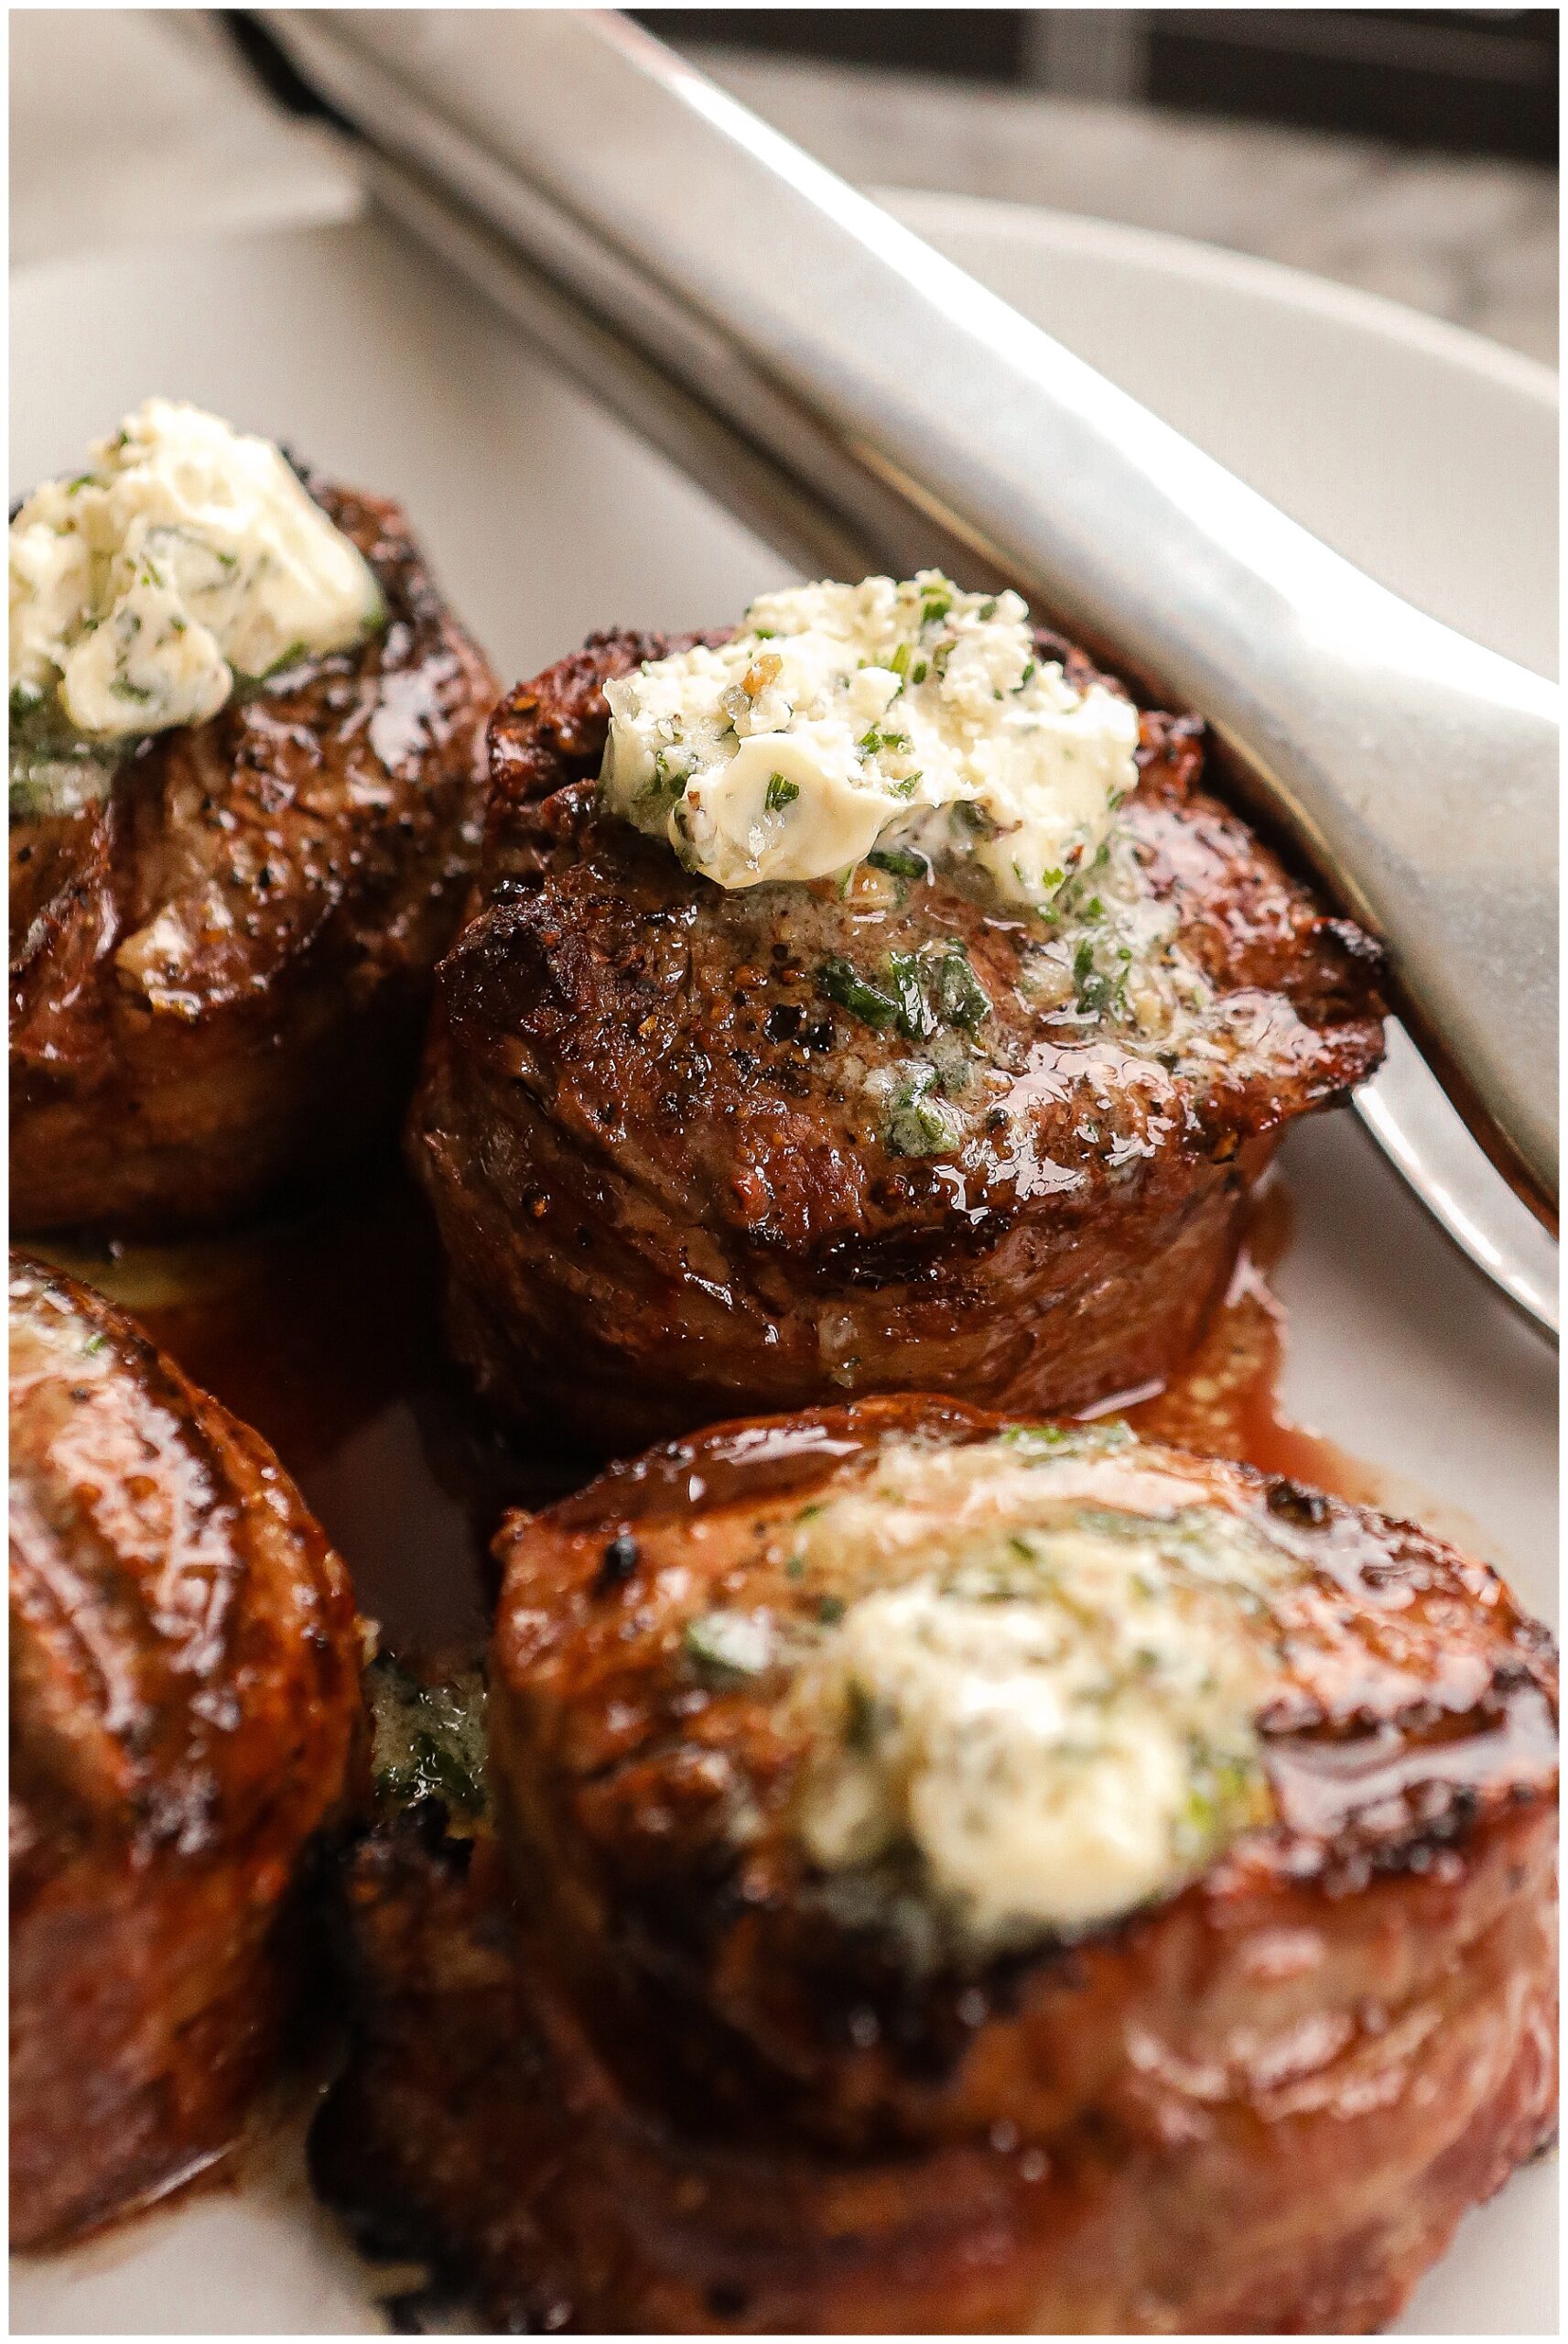 Recipe for Bacon Wrapped Filet Mignon with compound butter.